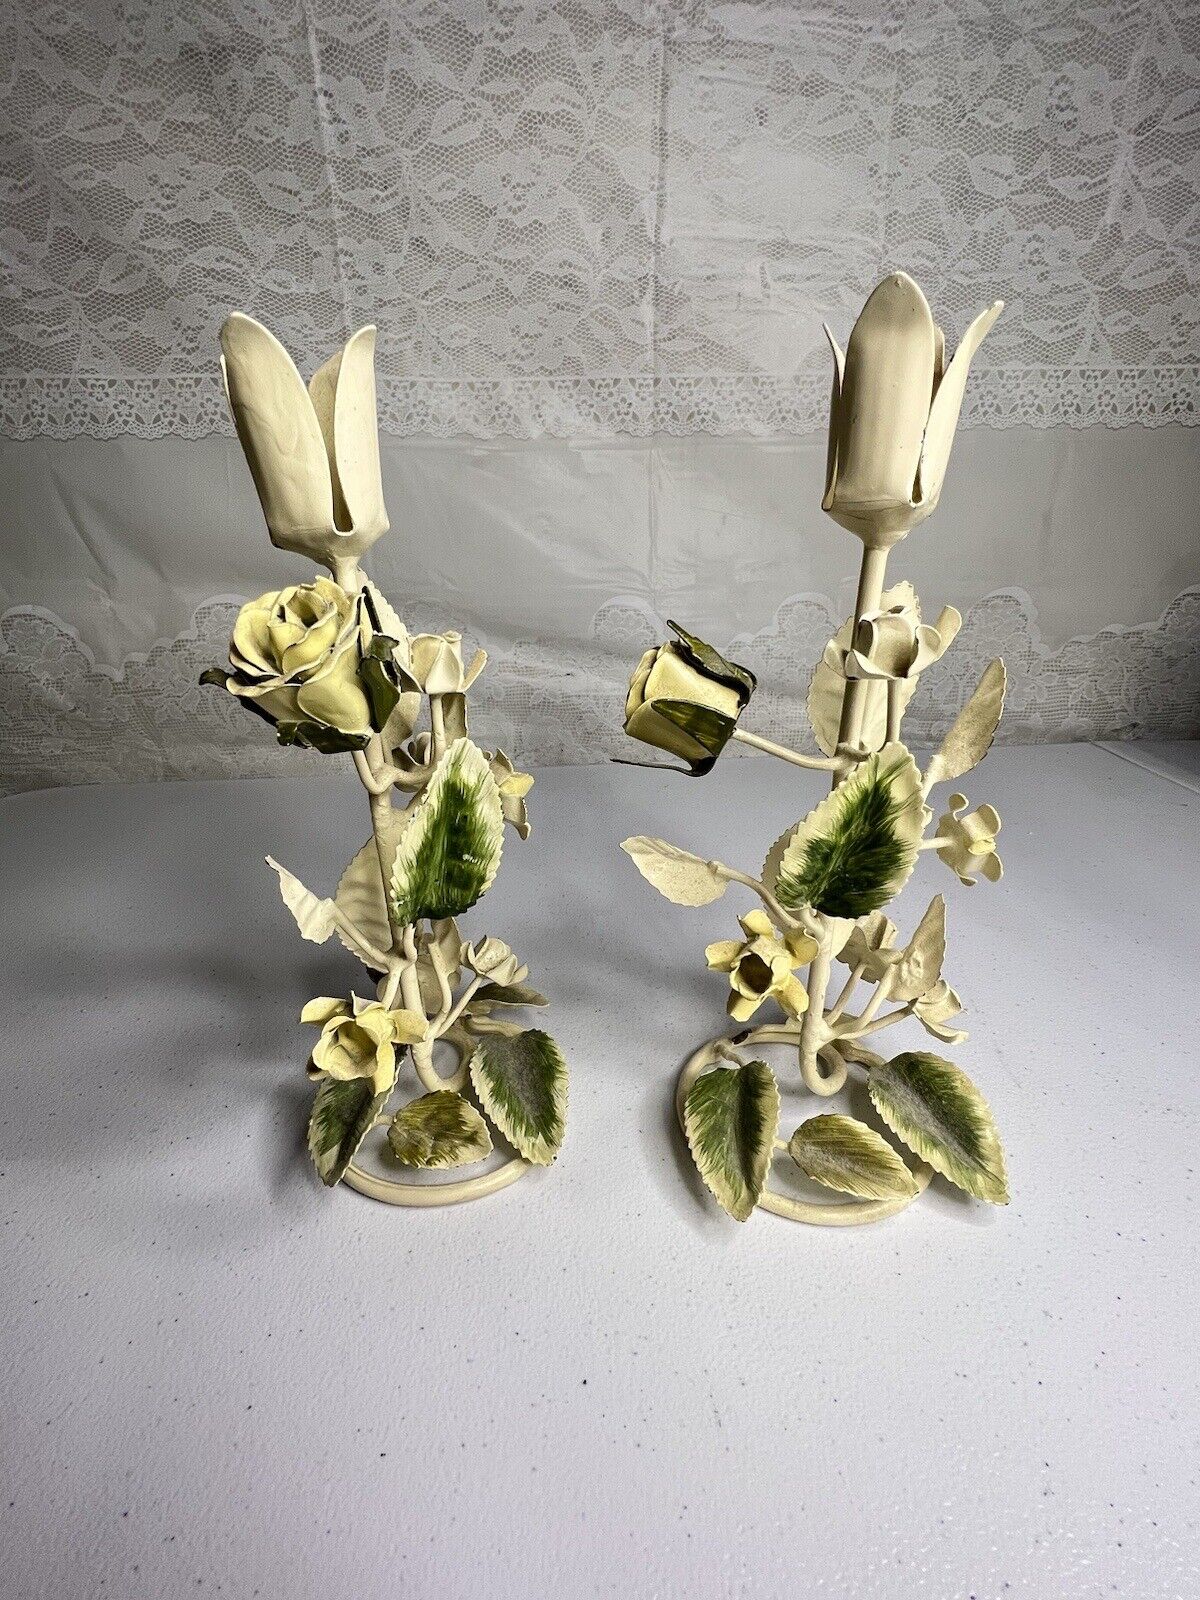 Italian Tole Ware Metal Candle Holders 9” Vintage Cottagecore Floral Cream Green